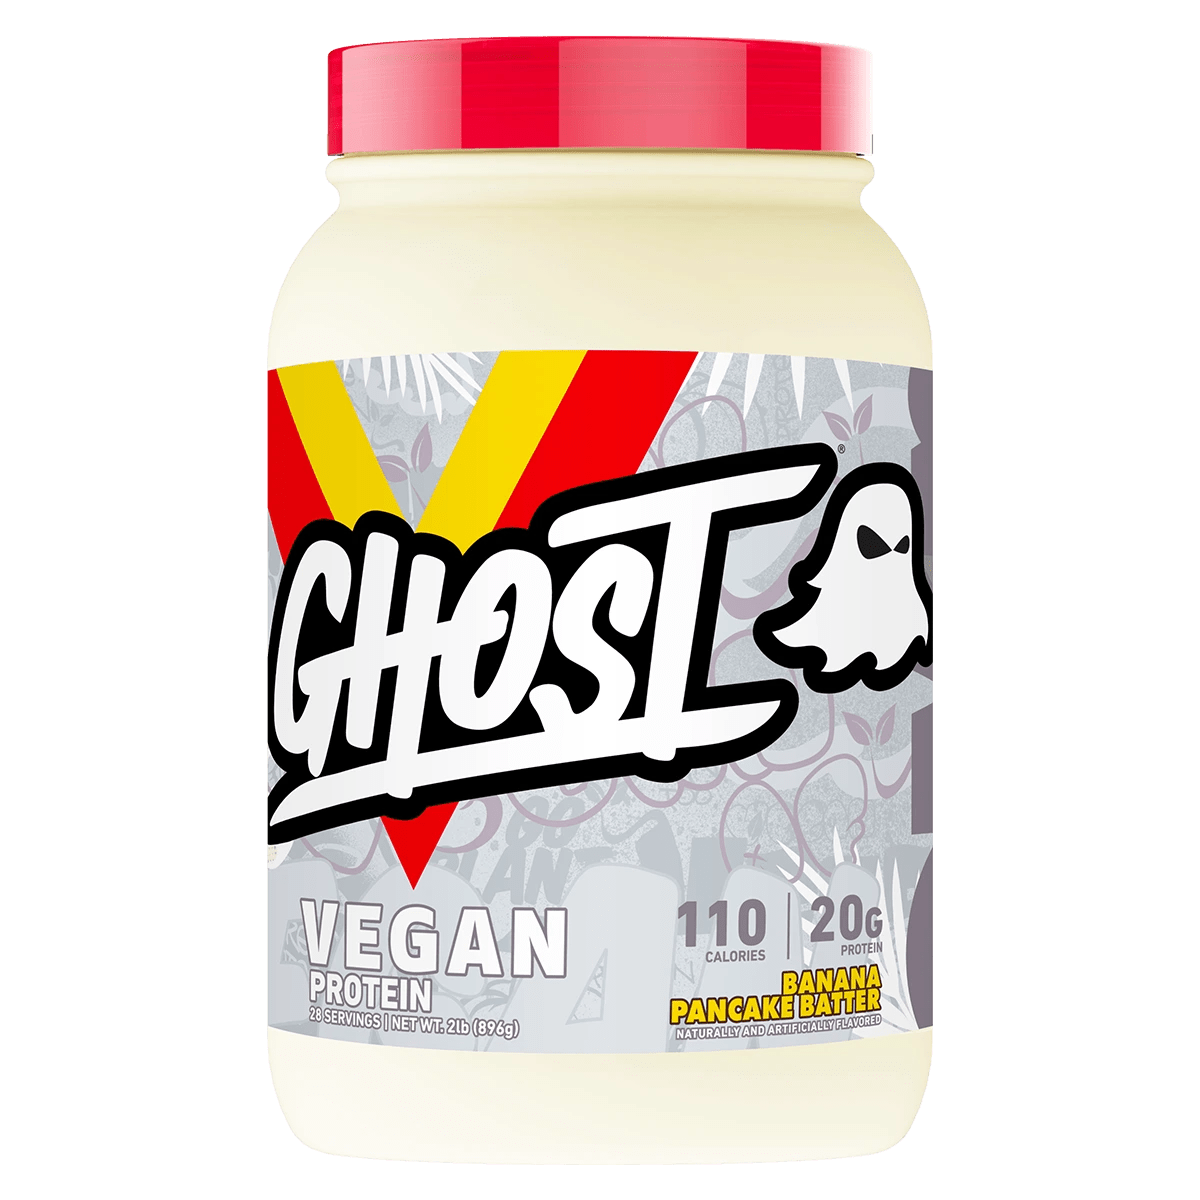 Ghost Lifestyle - Vegan Protein - Supplements - 28 Serves (2lb) - The Cave Gym